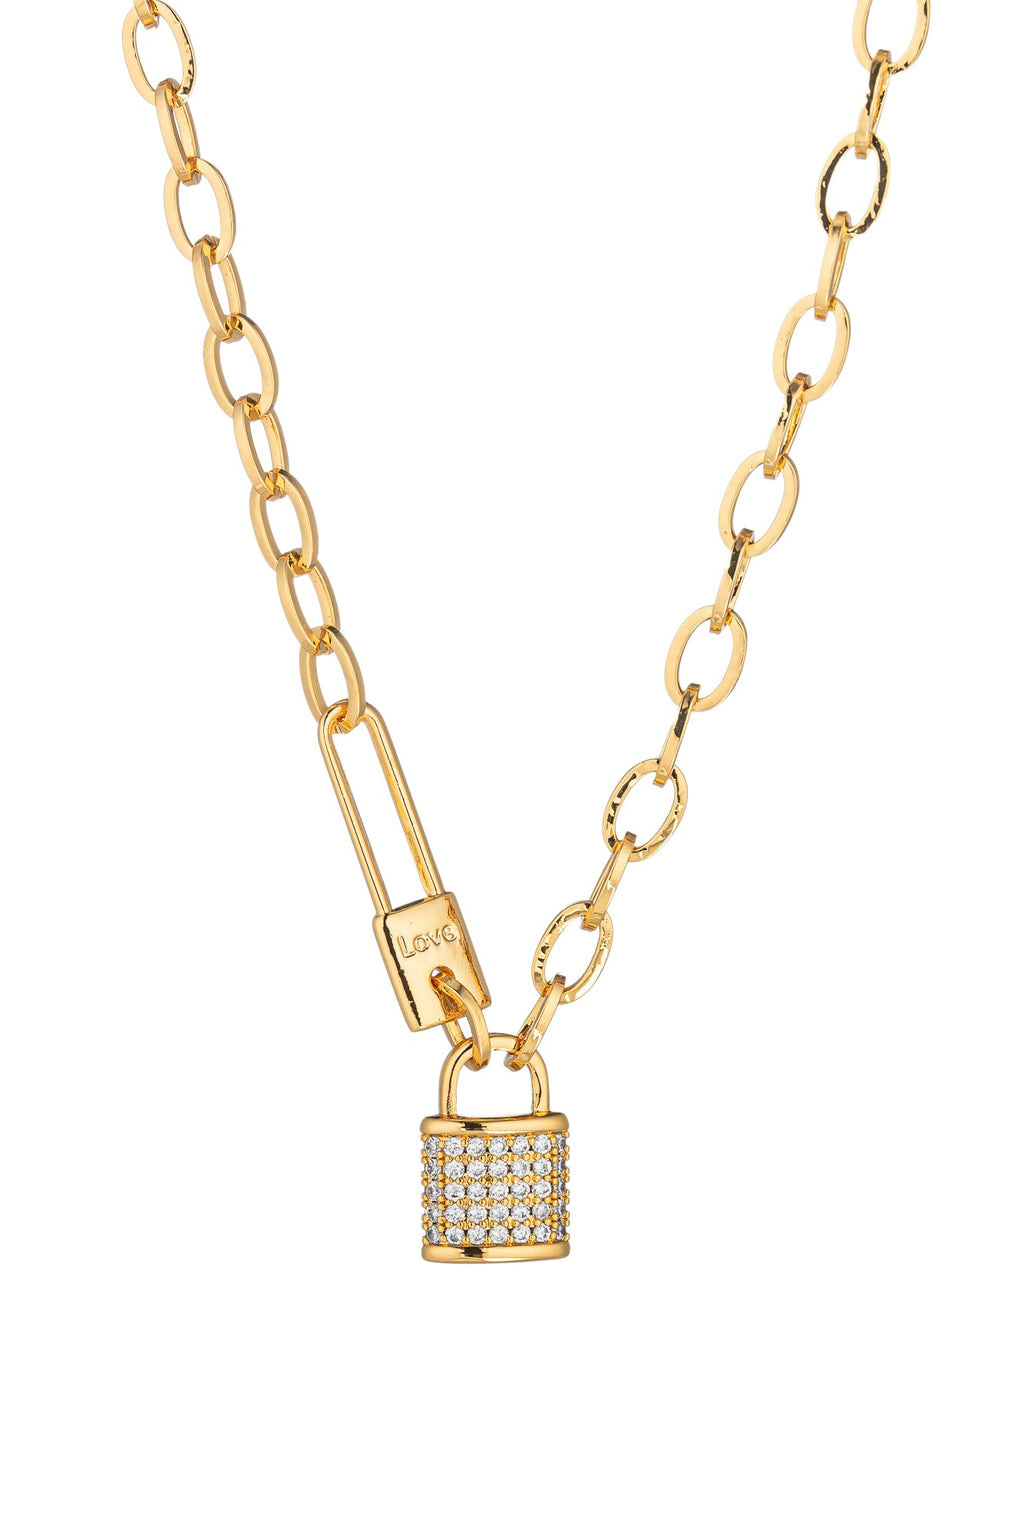 Unlock timeless beauty with our 18K Gold Plated Lock Necklace, adorned with dazzling cubic zirconia stones